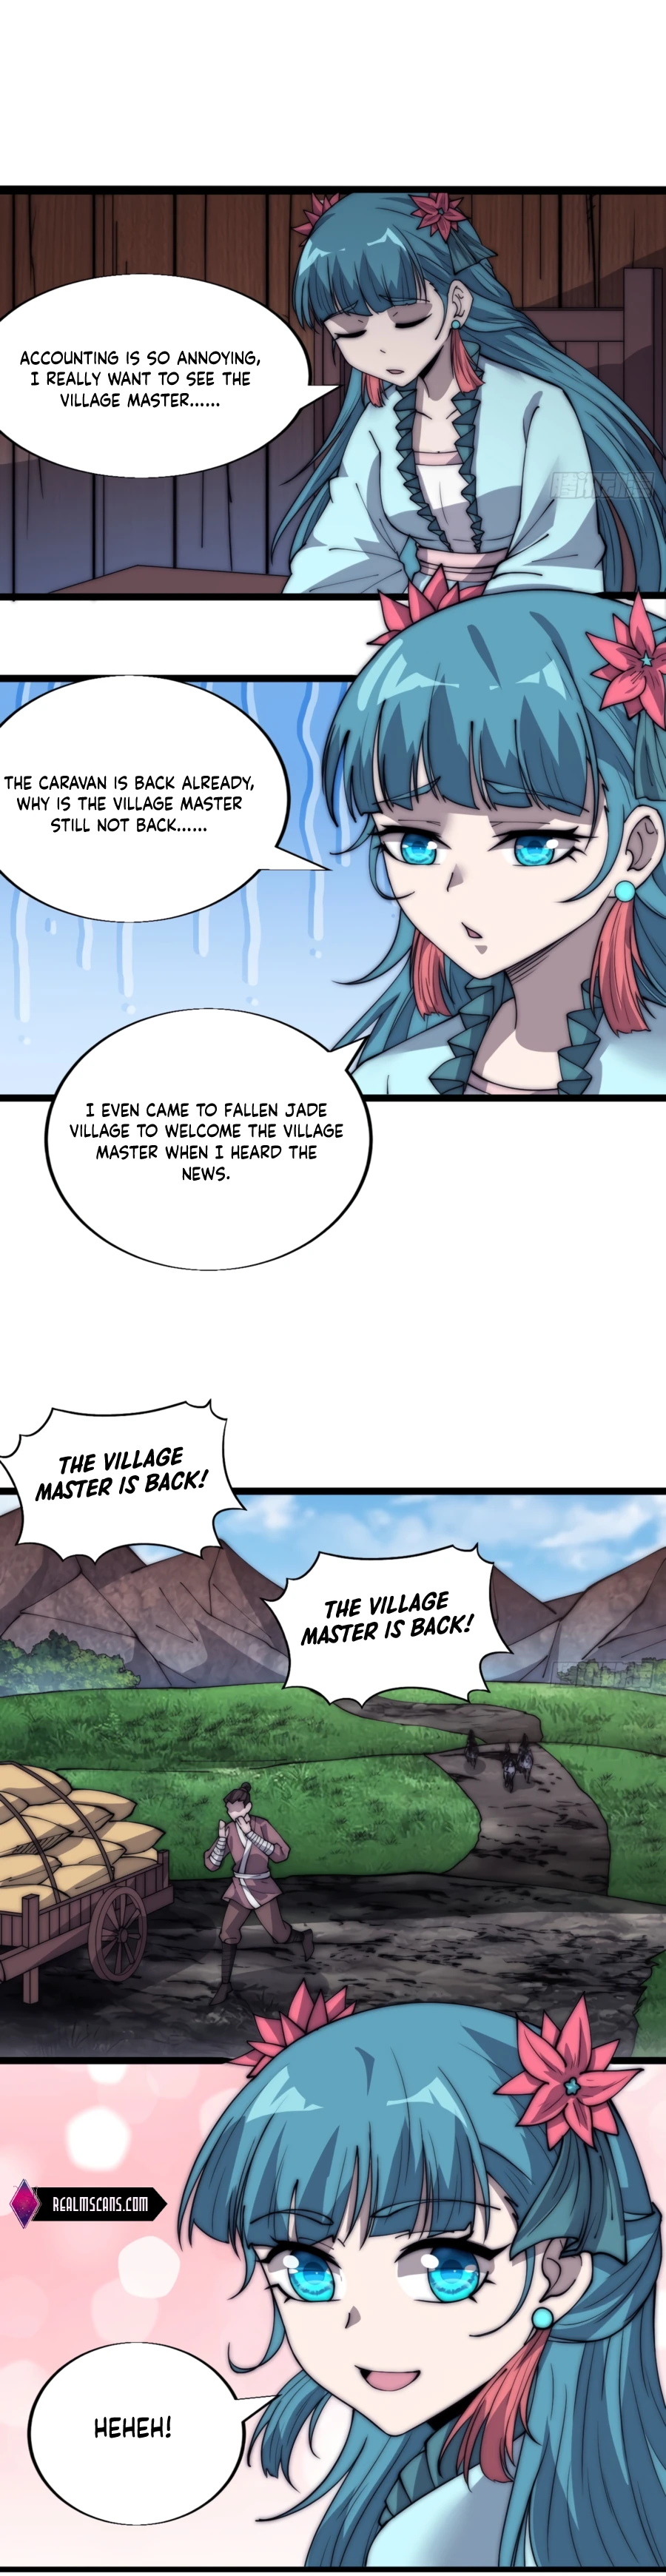 It Starts With A Mountain - Page 4